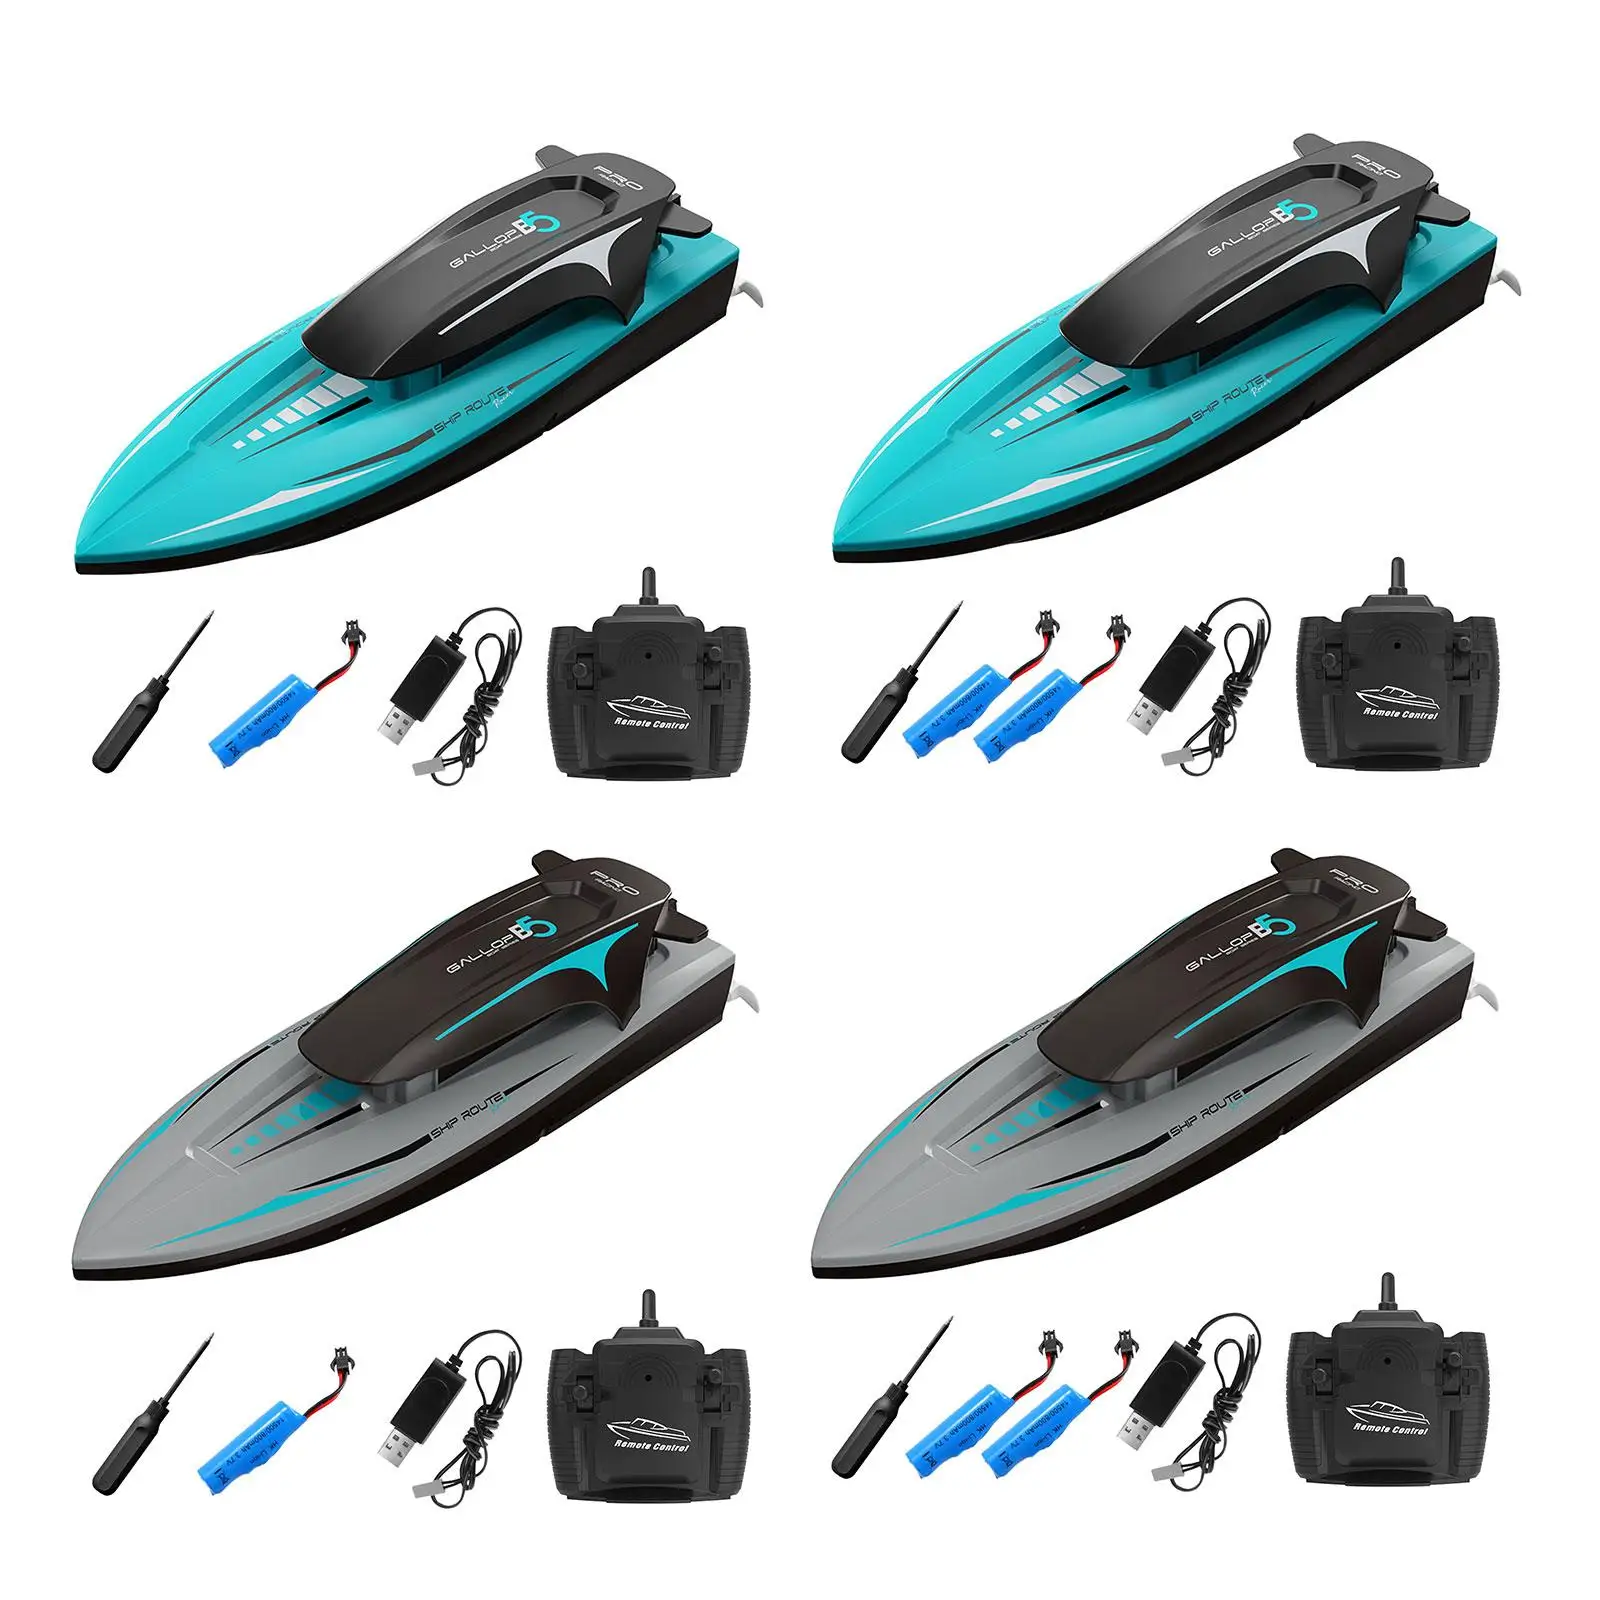 Remote Control Speedboat Simple to Control Dual Motor for Lakes Outdoor Toys